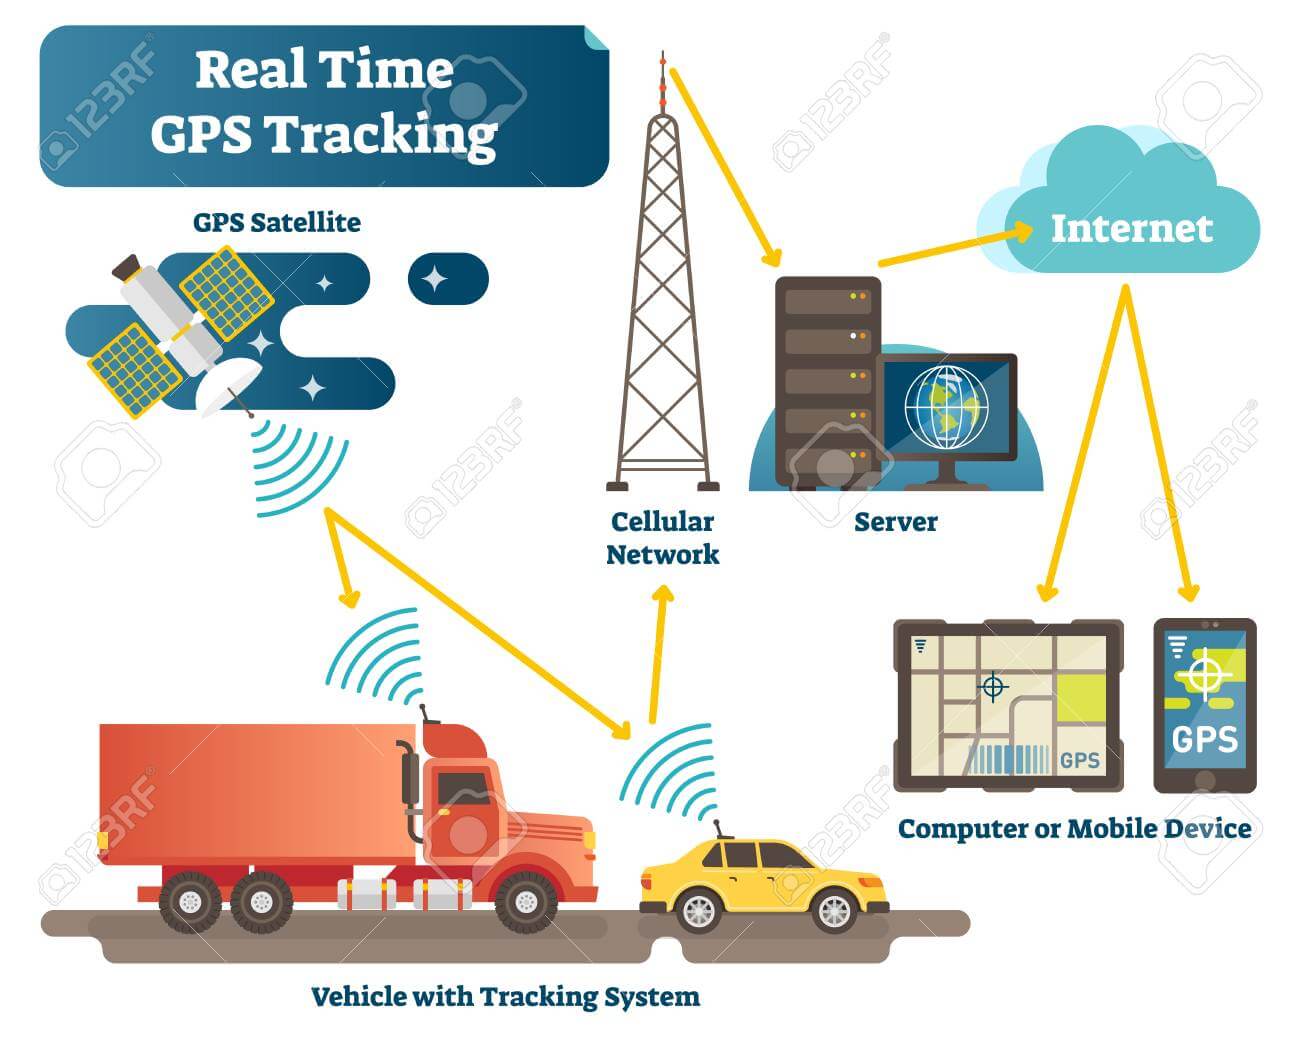 Real time GPS Tracking System